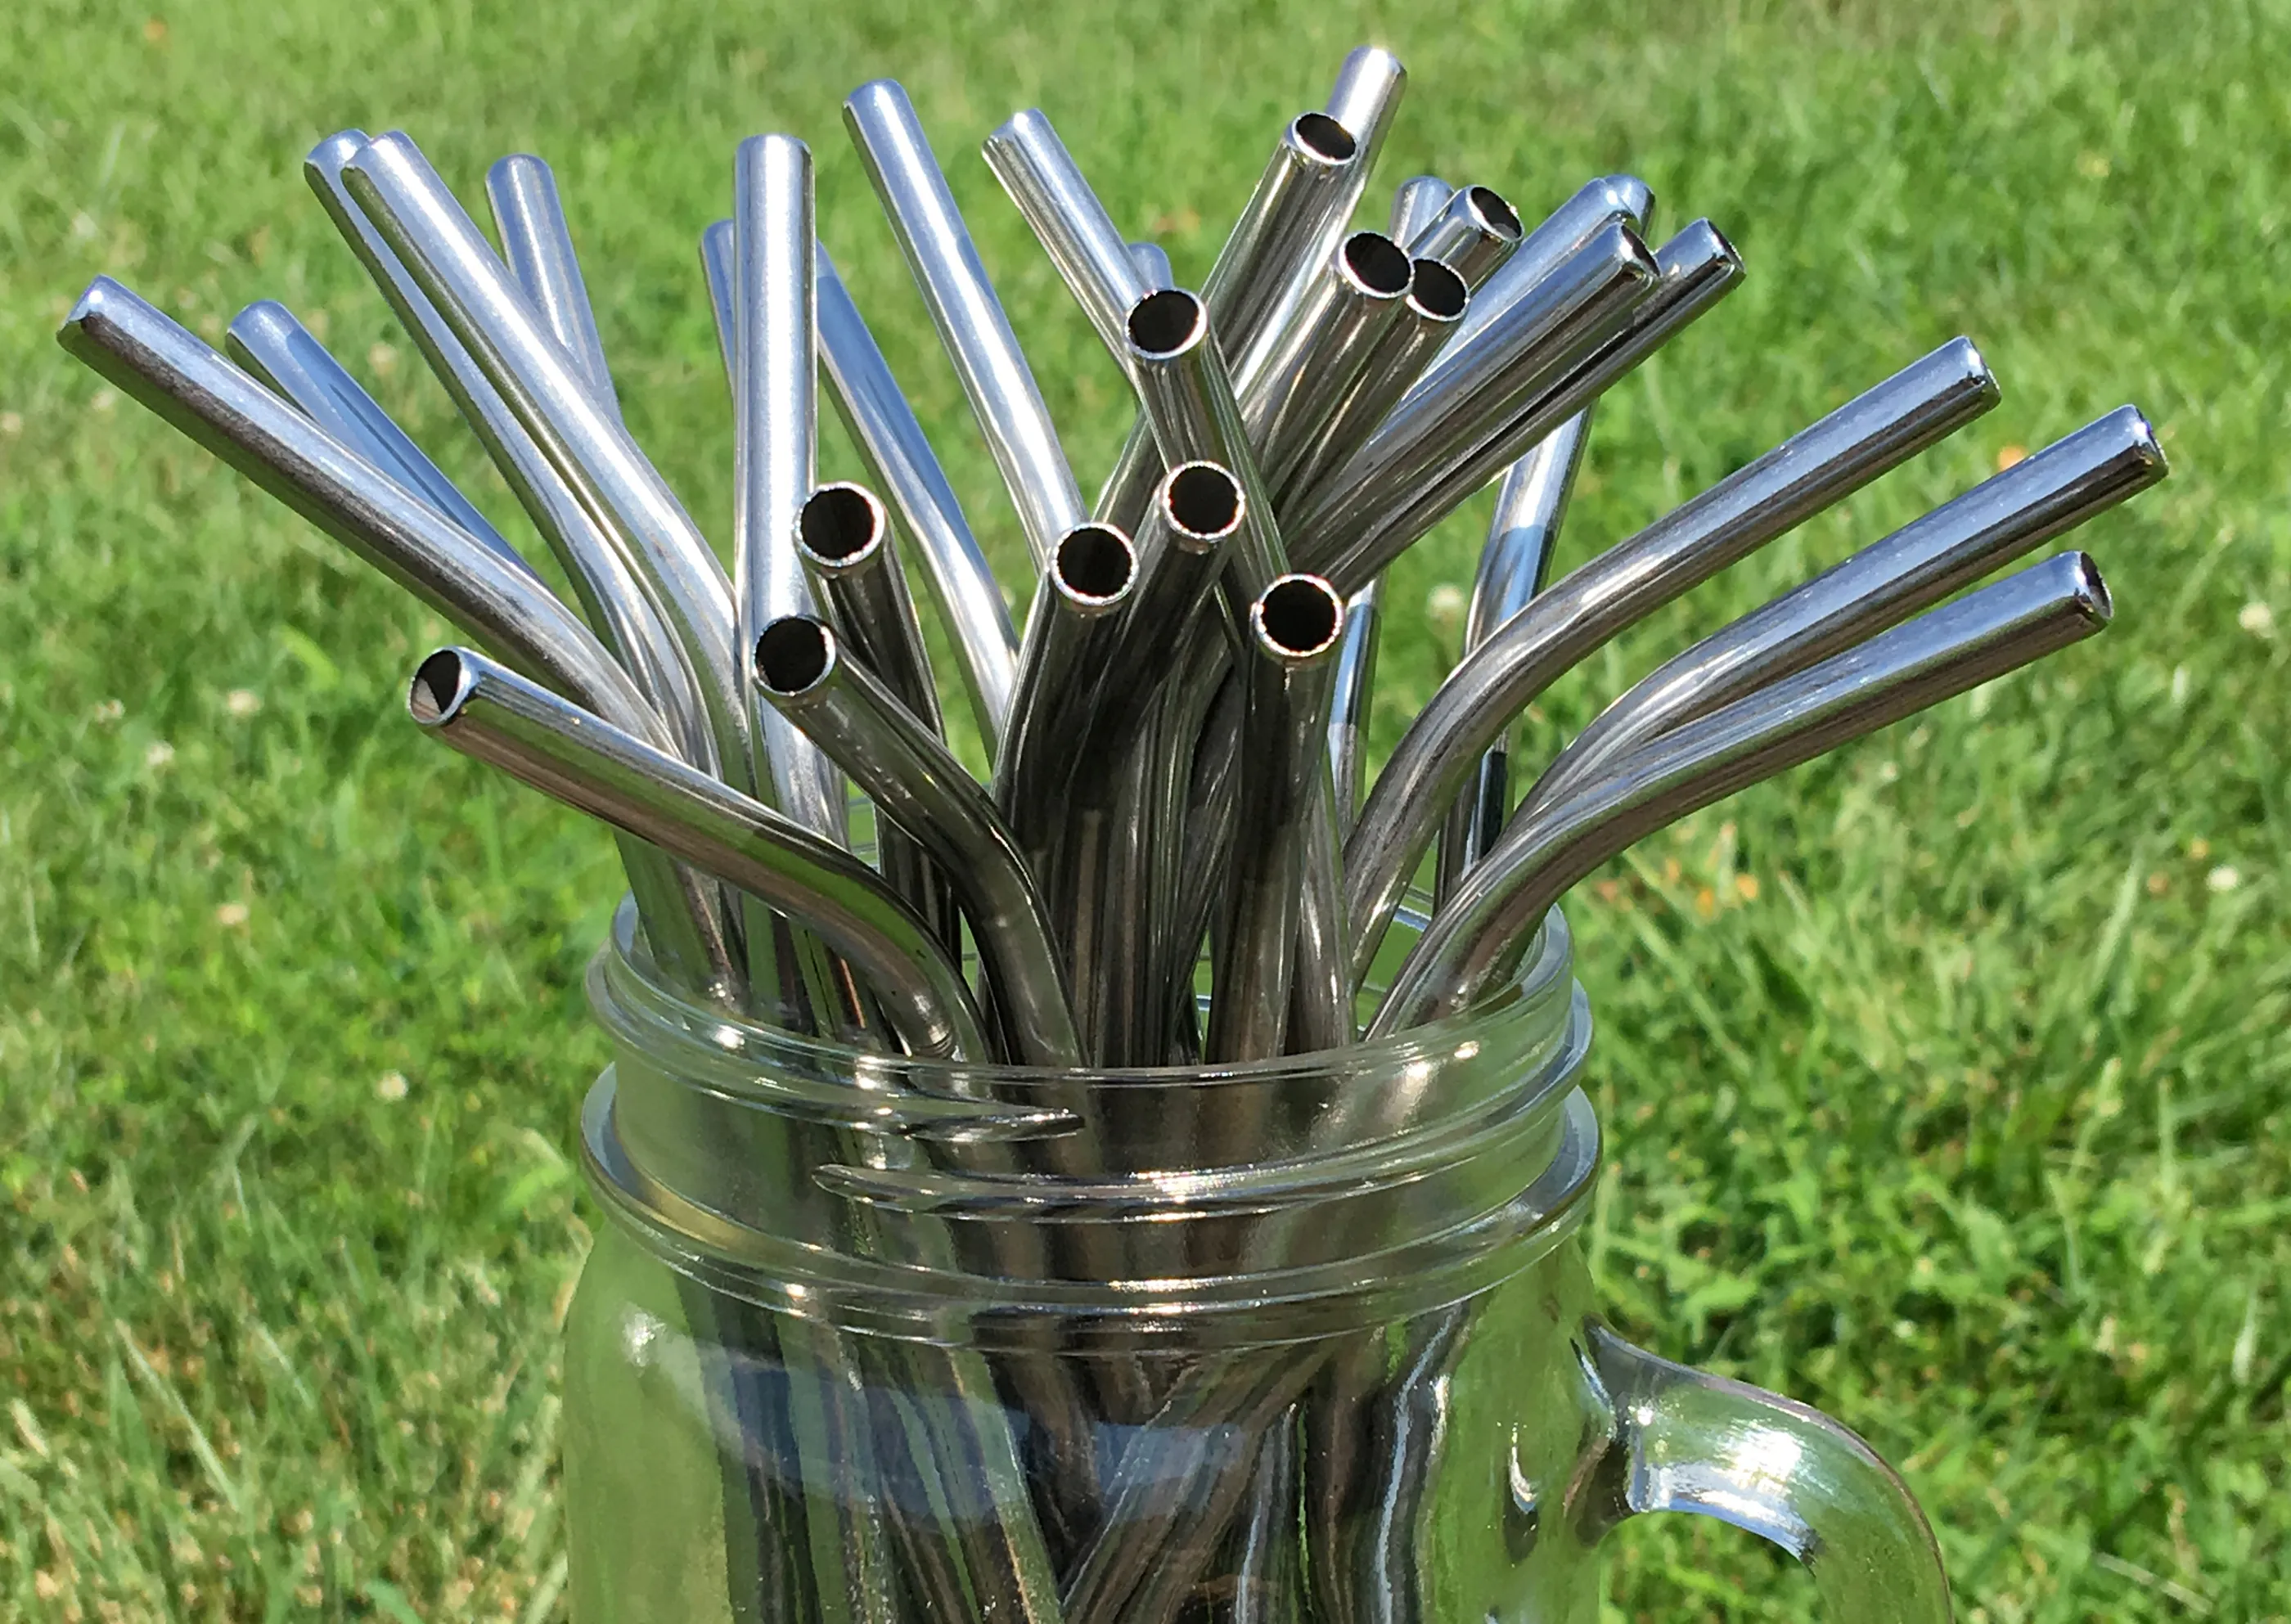 Stainless Steel and Glass Cocktail Straws Plastic is Sooo Last